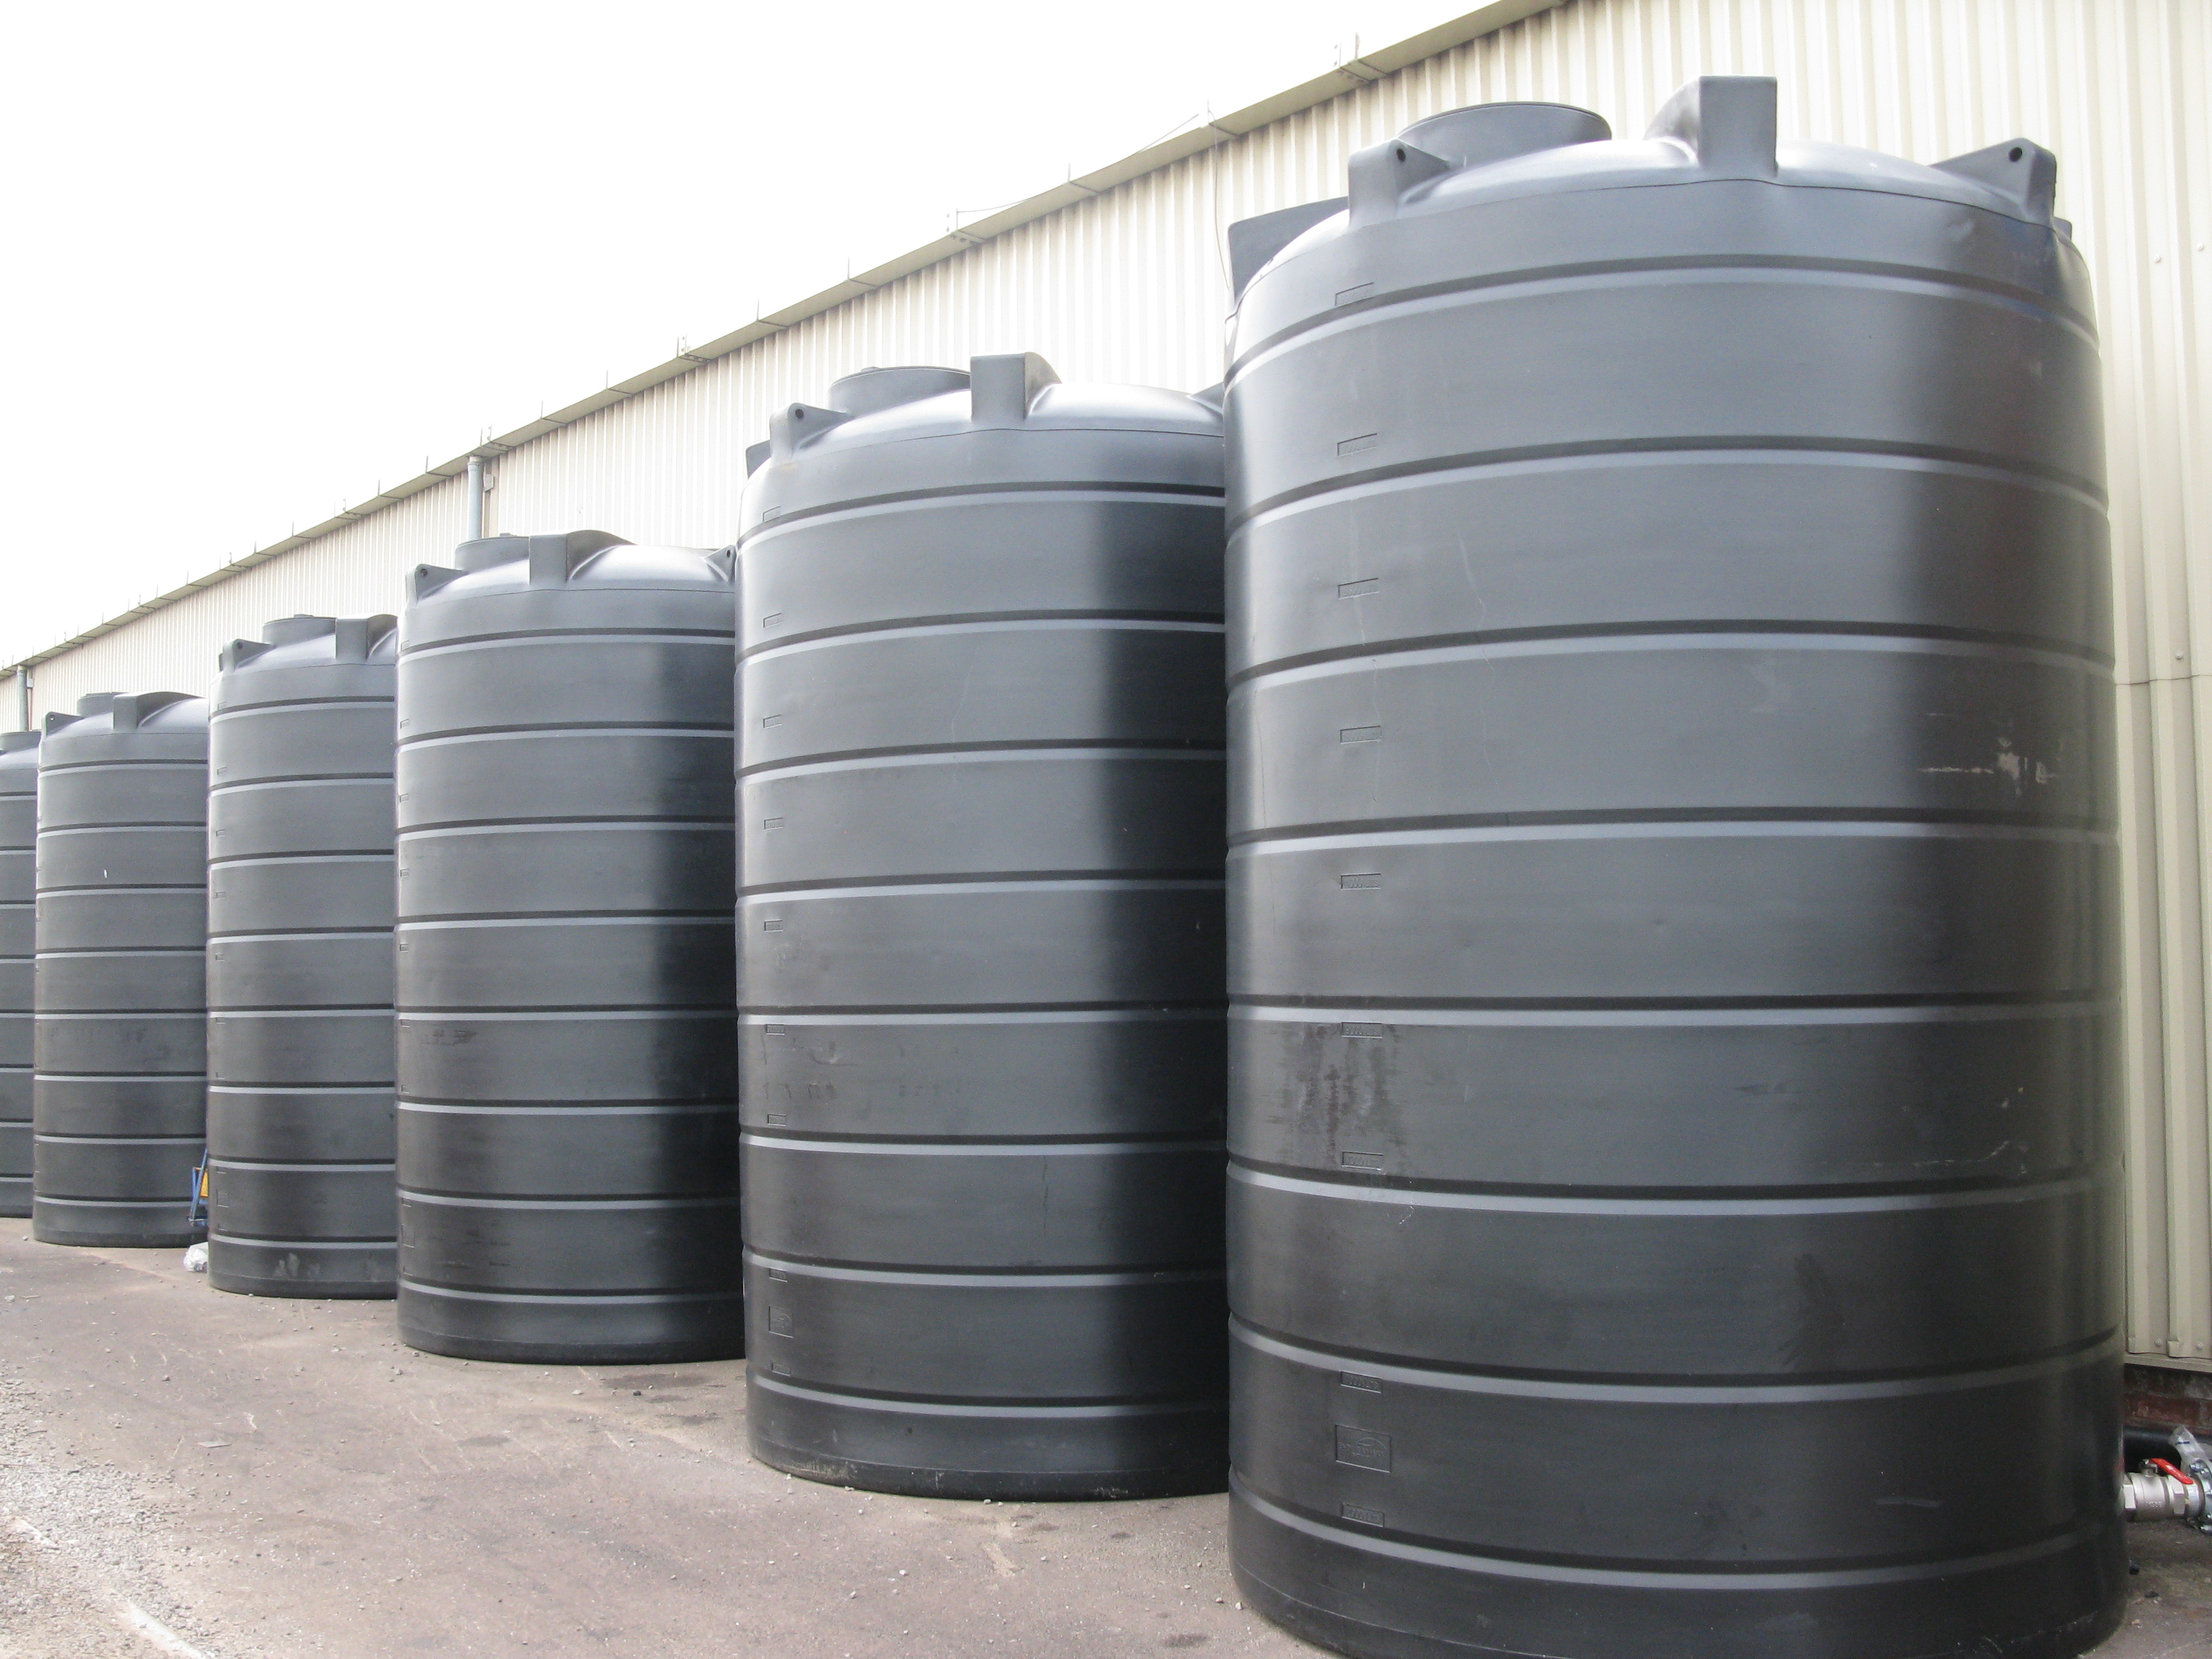 water-tanks-what-are-they-used-for